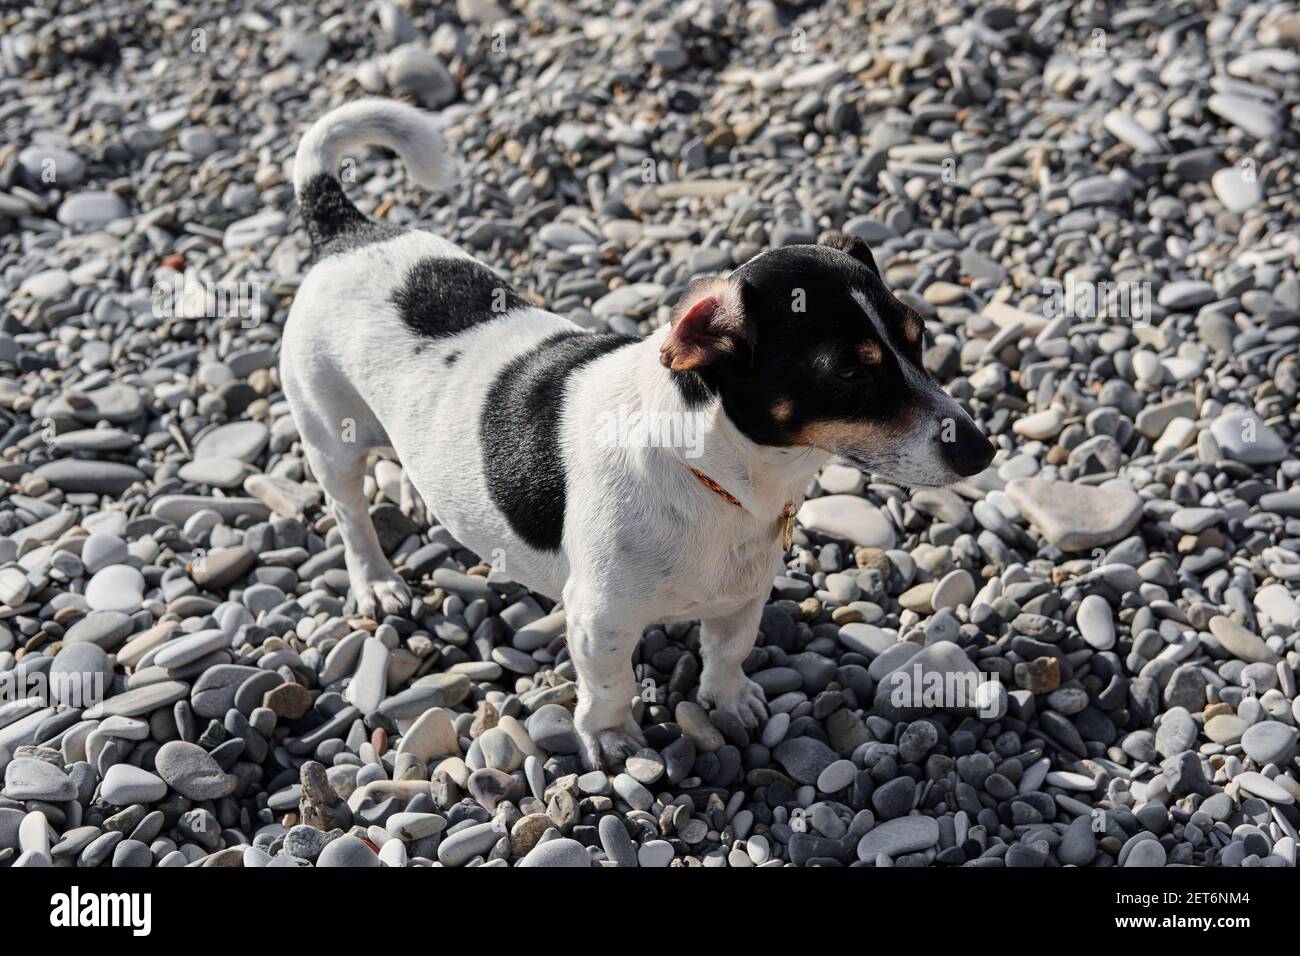 Smooth Haired Jack Russell Terrier On Walk Black And White Little English Hunting Breed Of Dog Walking On Pebble Beach And Breathing In Fresh Air Stock Photo Alamy